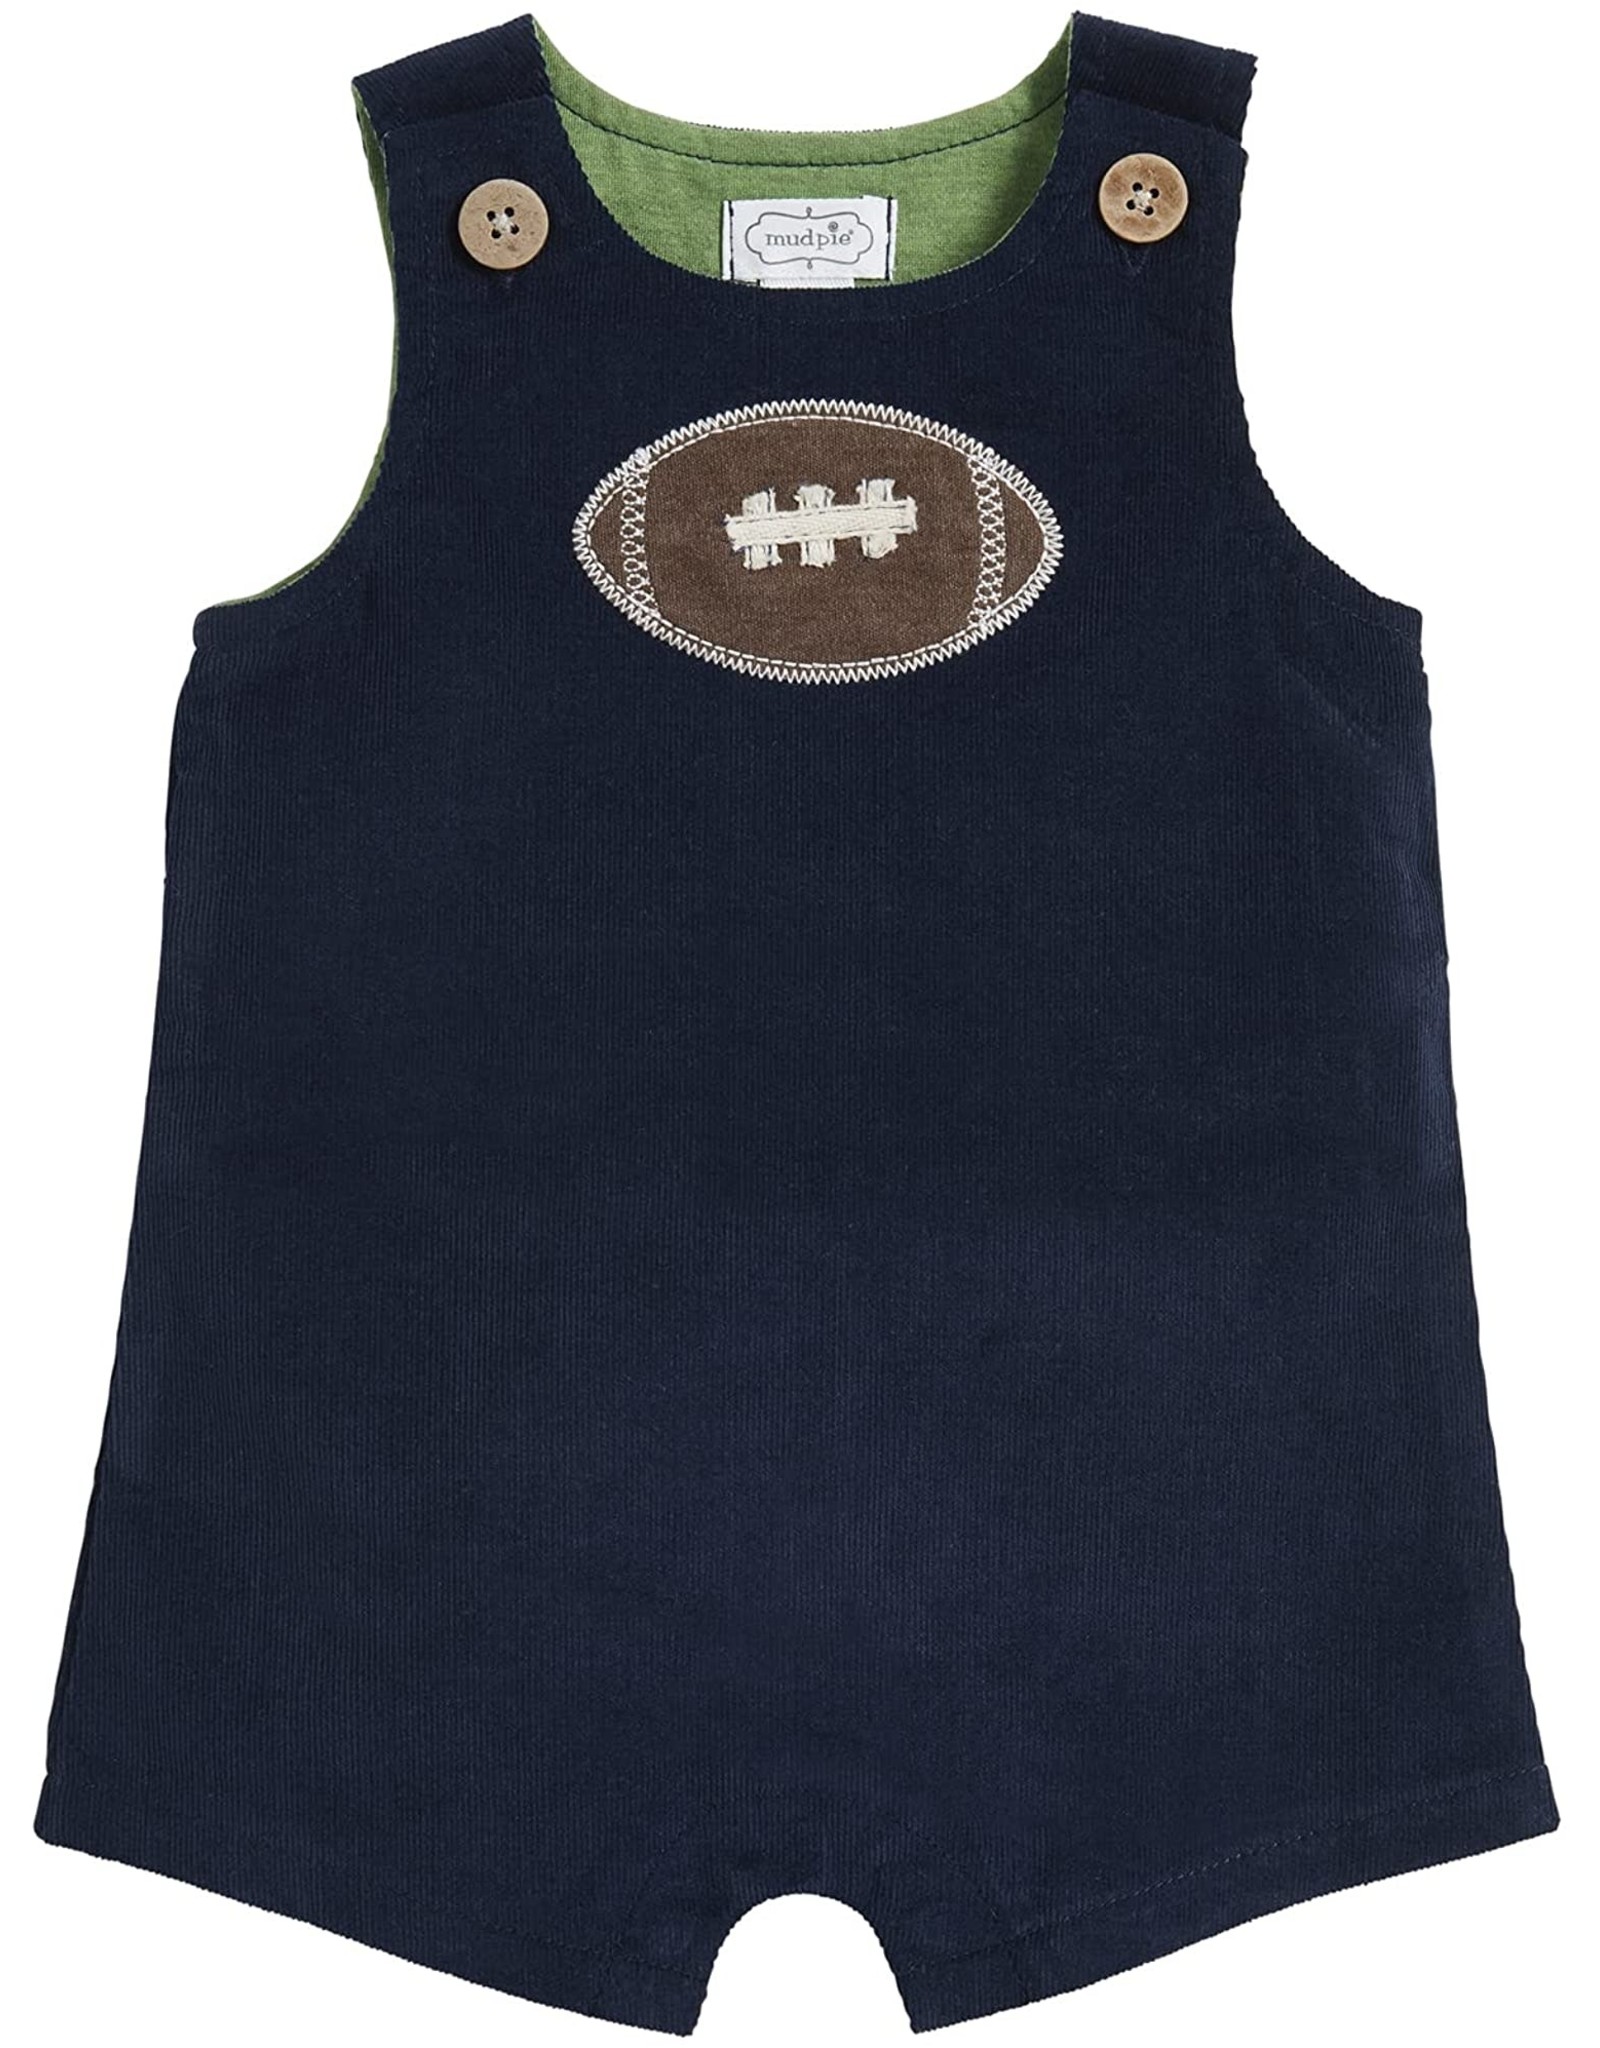 Mud Pie Baby N Kids Clothing One-Piece Football Shortall 3-6 Months